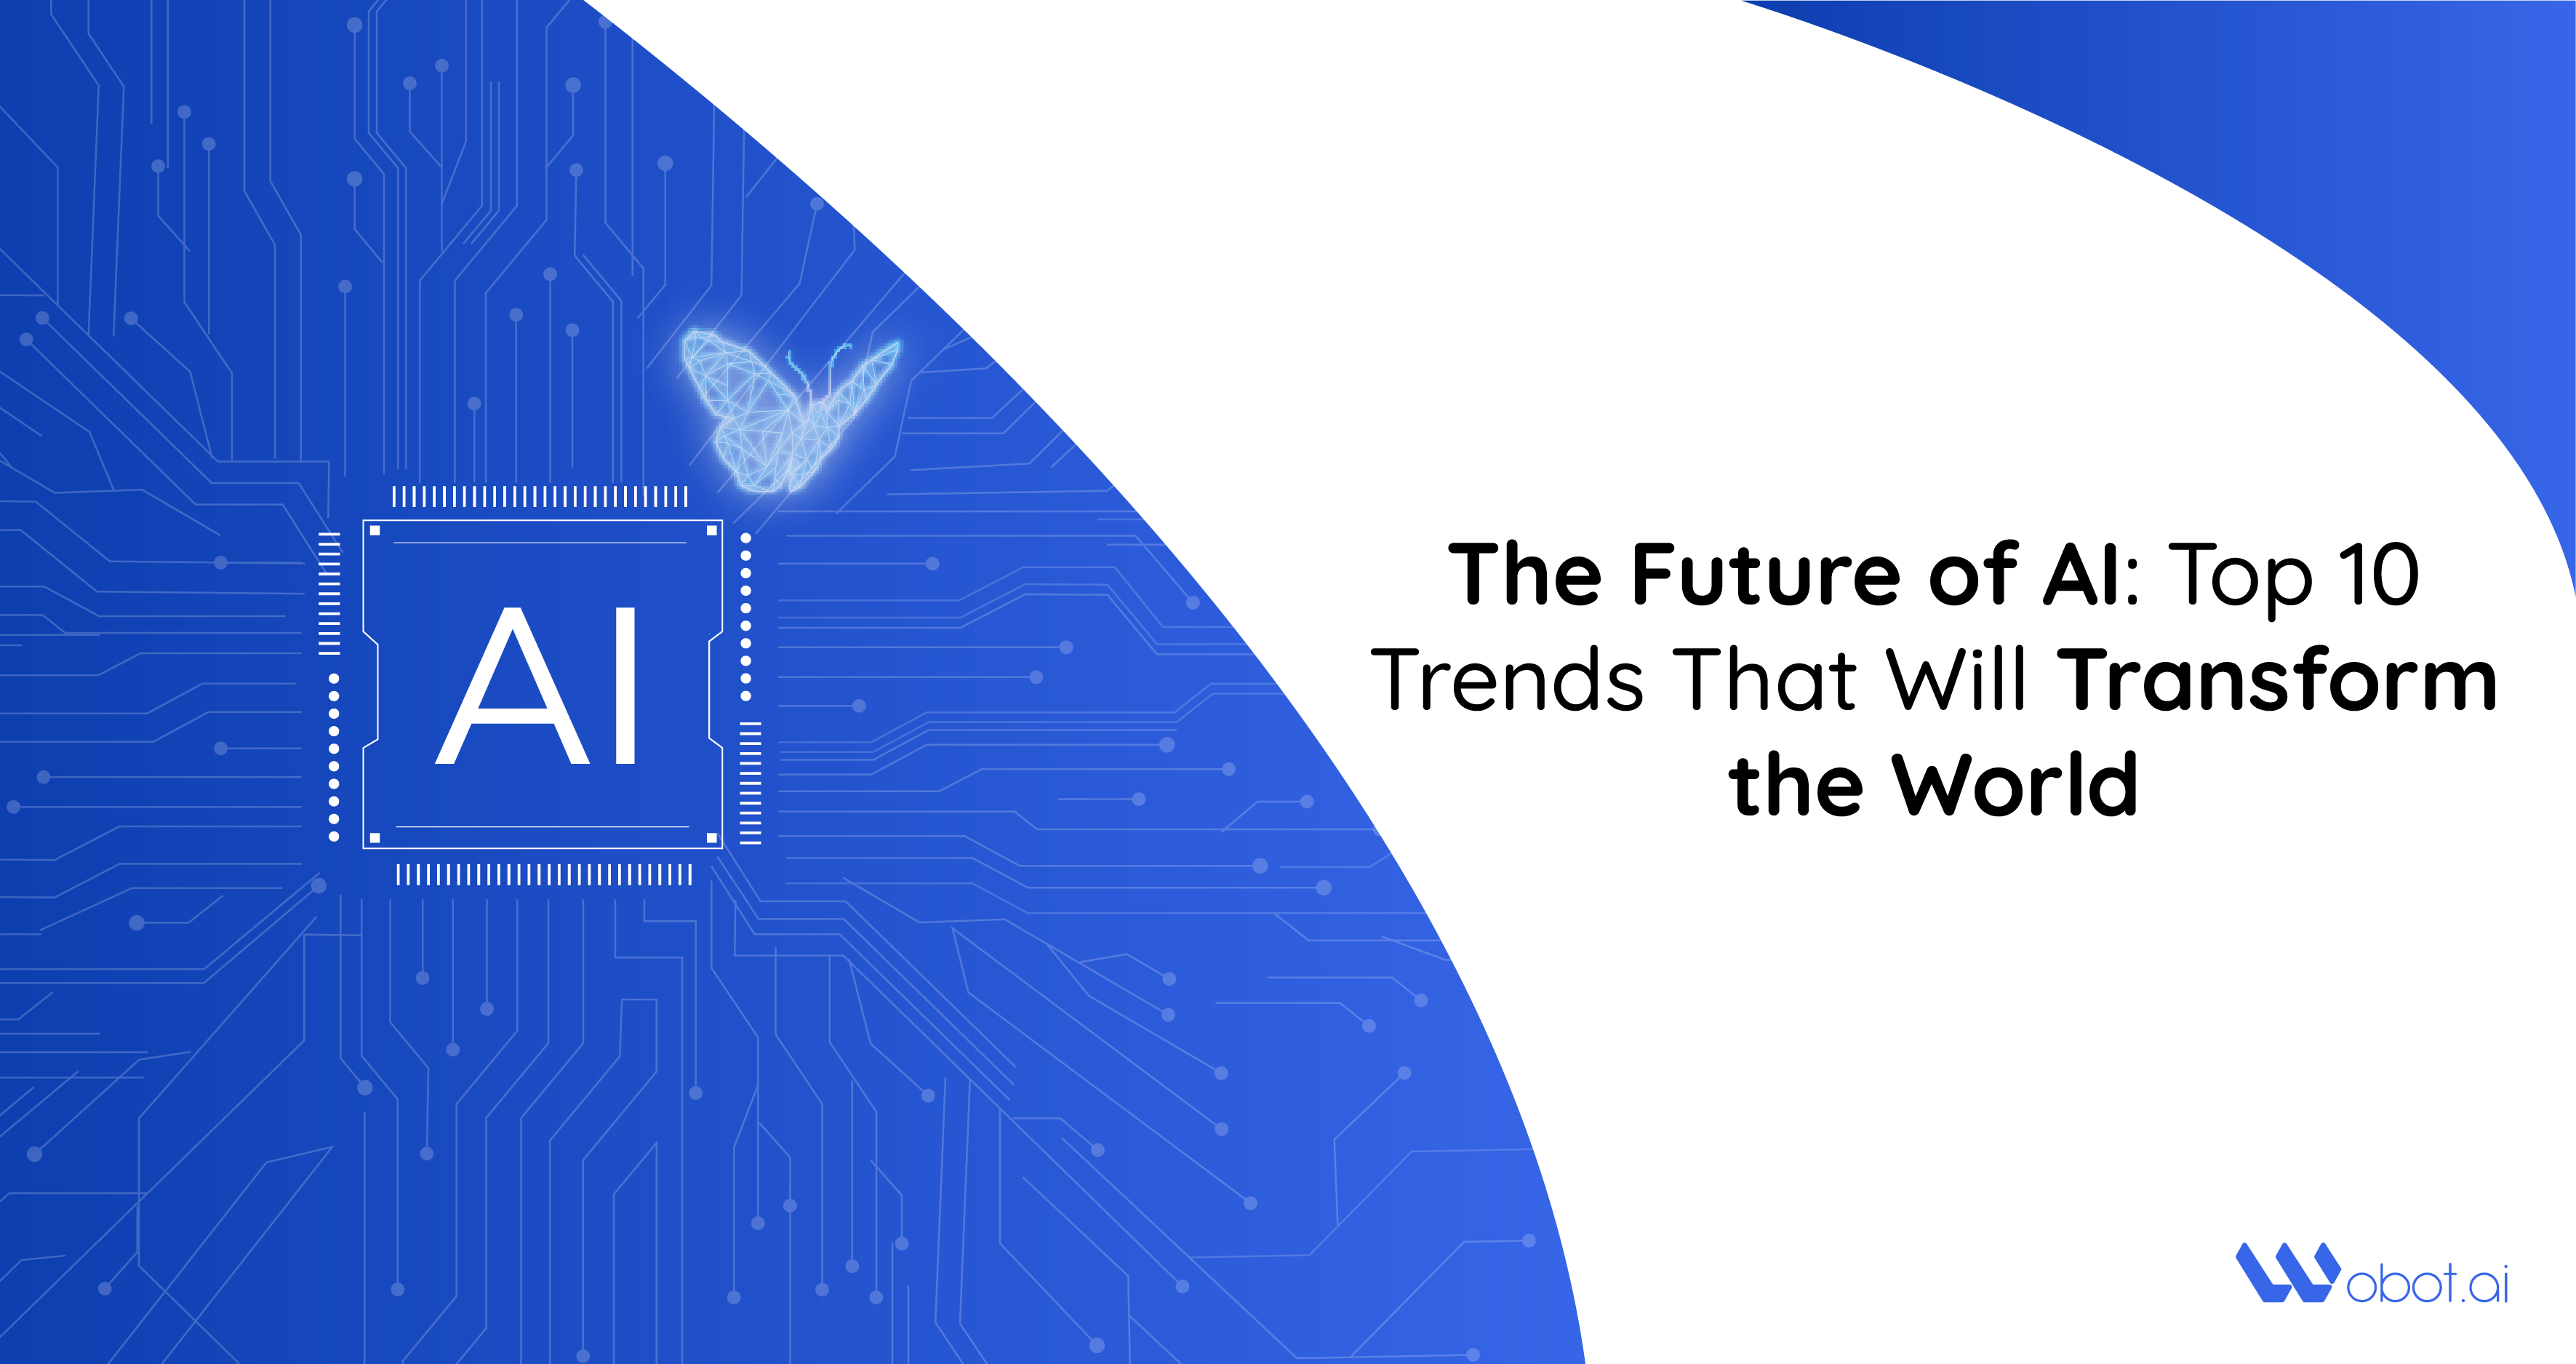 The Future of AI: Top 10 Trends That Will Transform the World